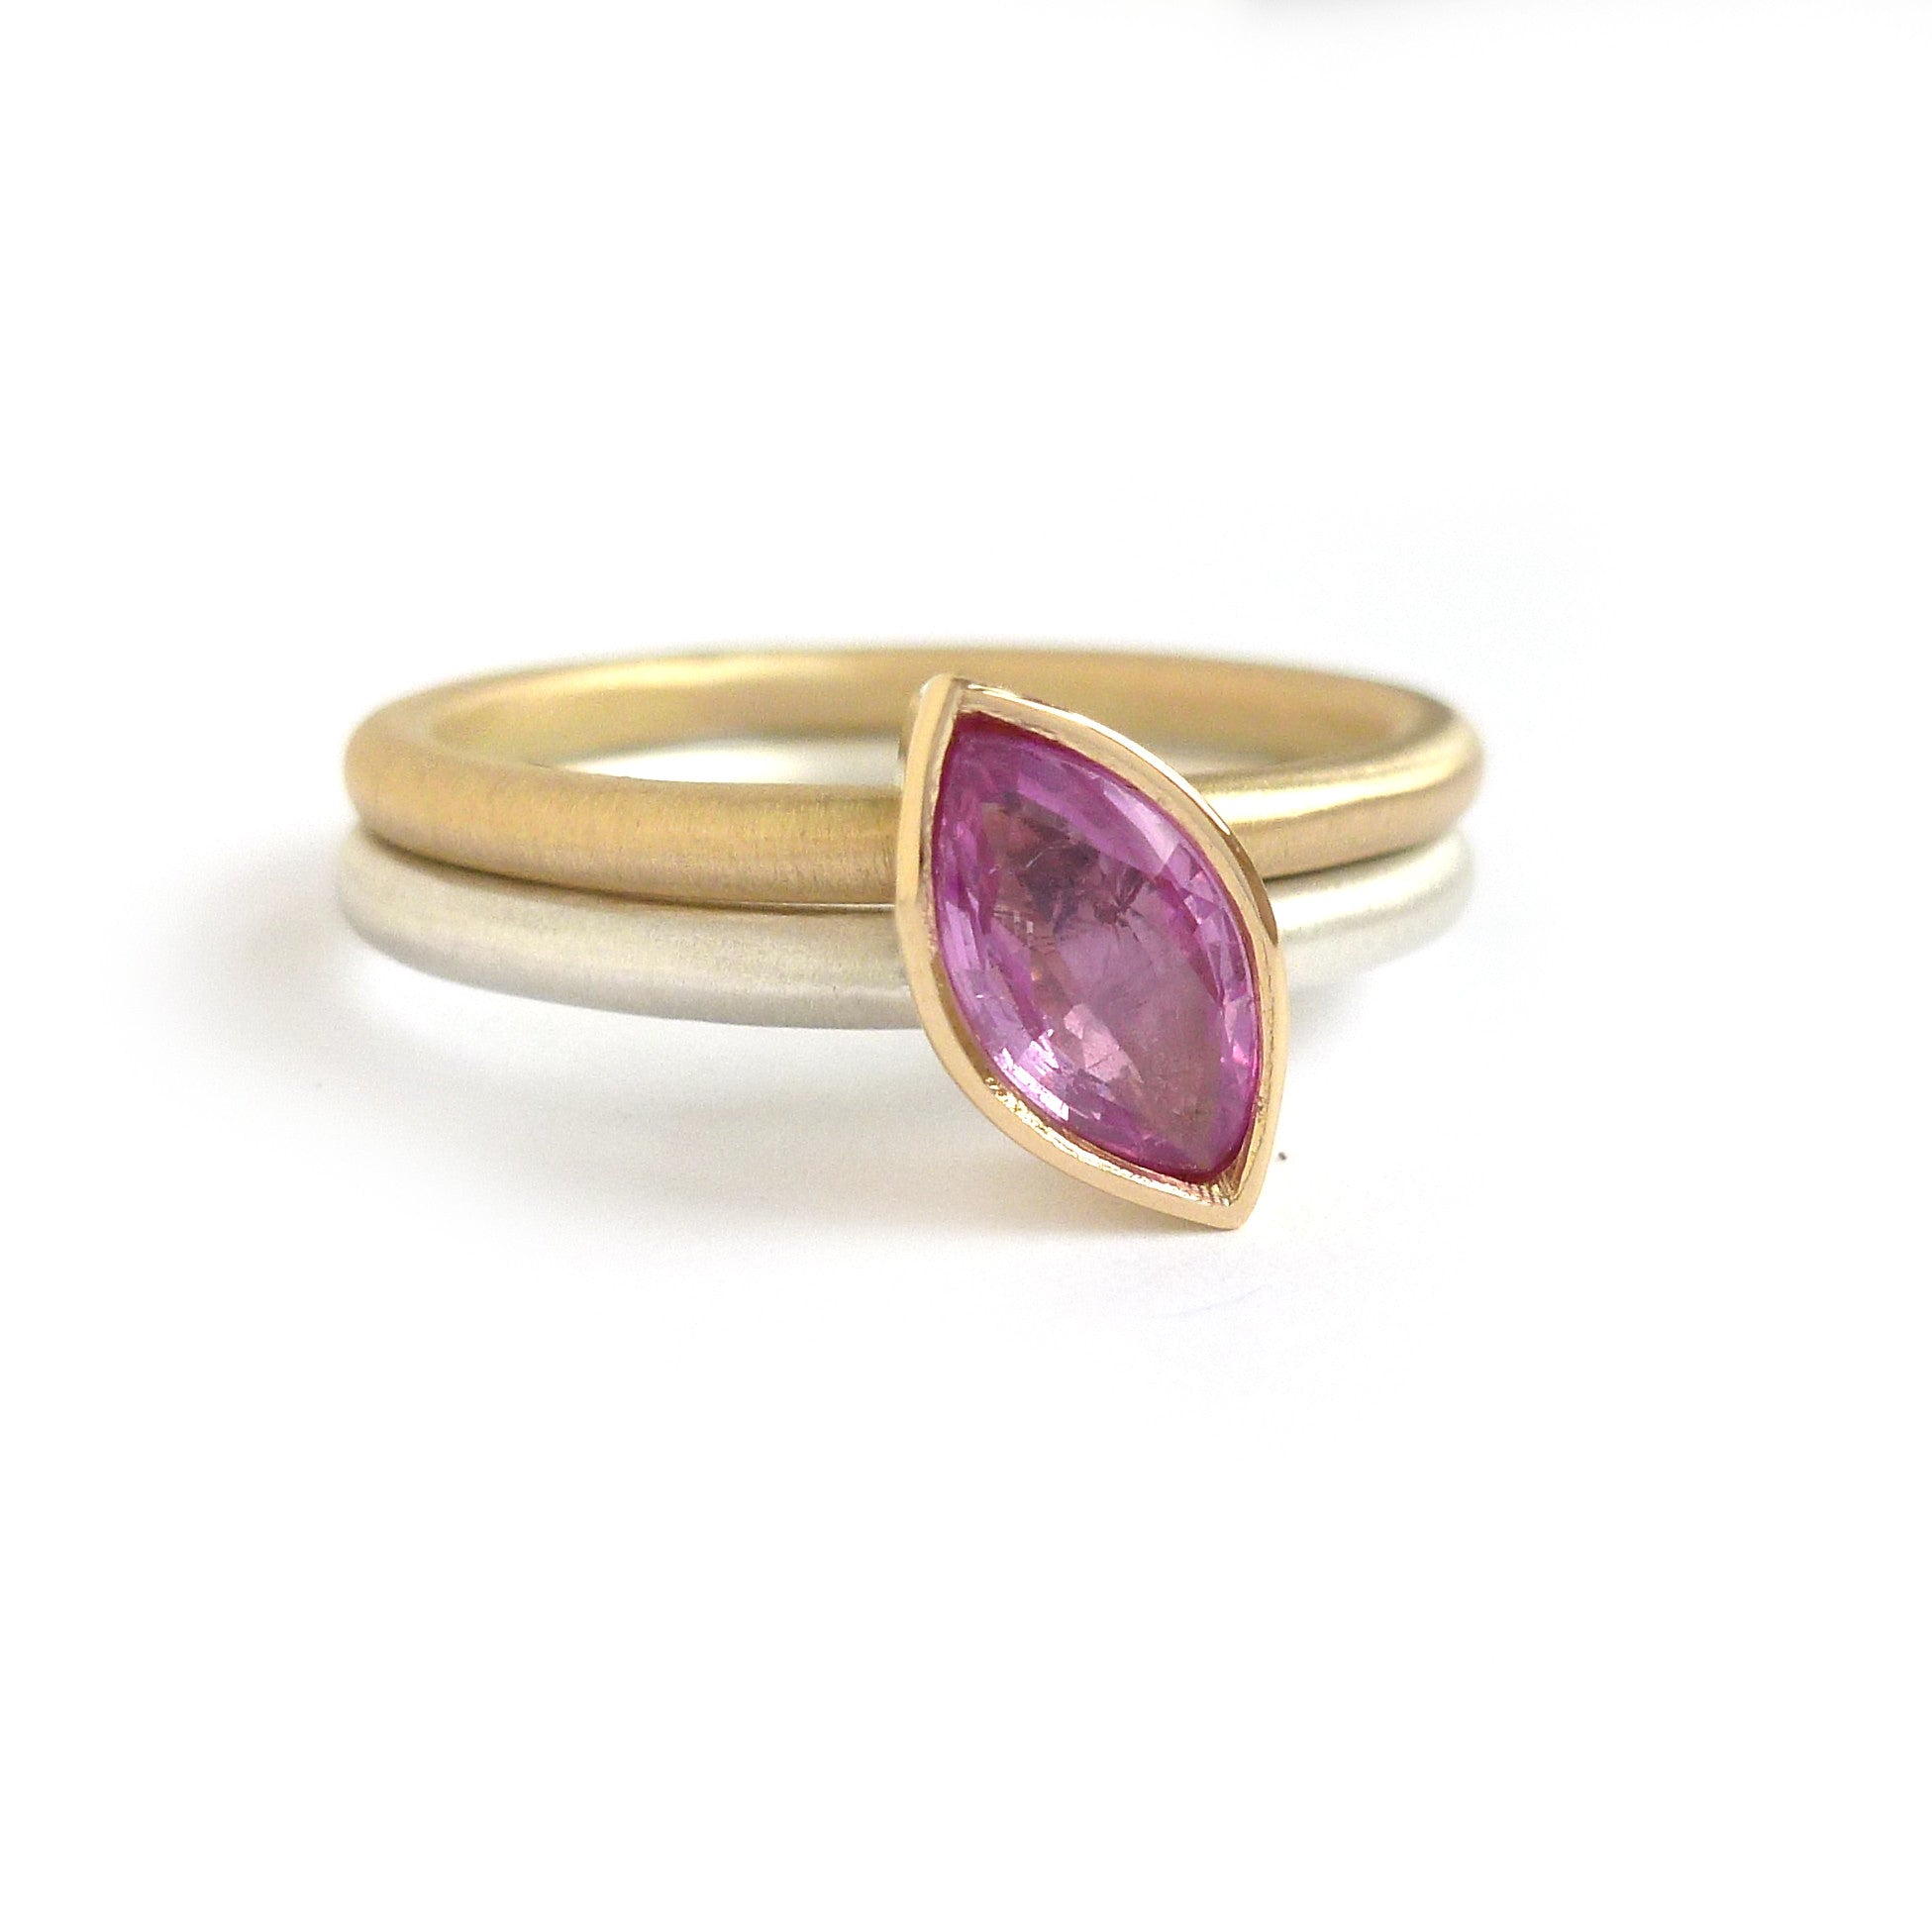 Bespoke silver and gold stacking ring. Green tourmaline and pink sapphire make a stunning ringset by designer and maker Sue Lane. Statement dress ring!